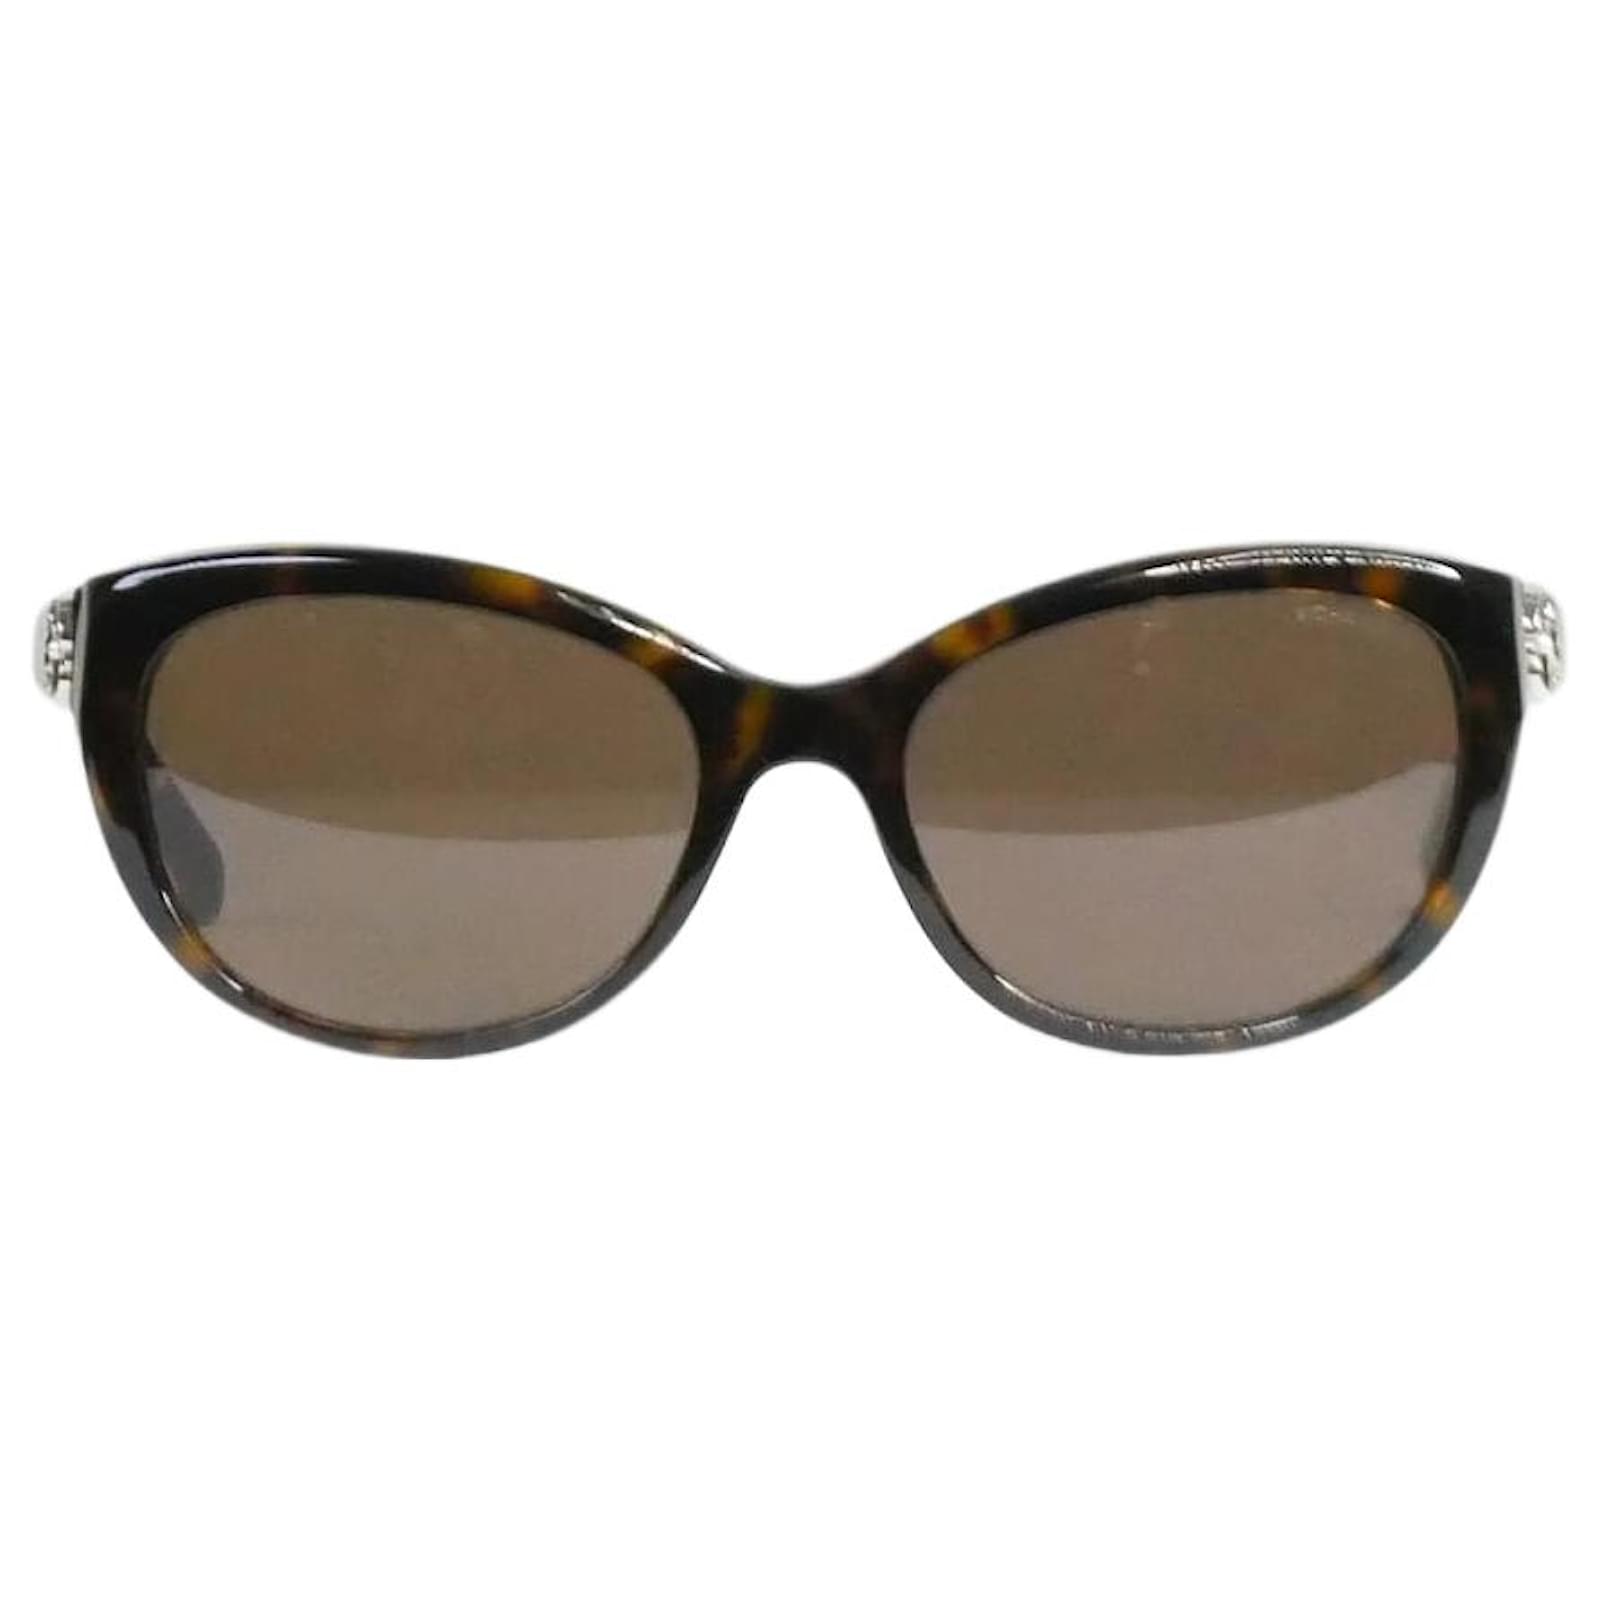 Chanel Brown tortoise shell sunglasses with flower detail at temple  ref.1021520 - Joli Closet